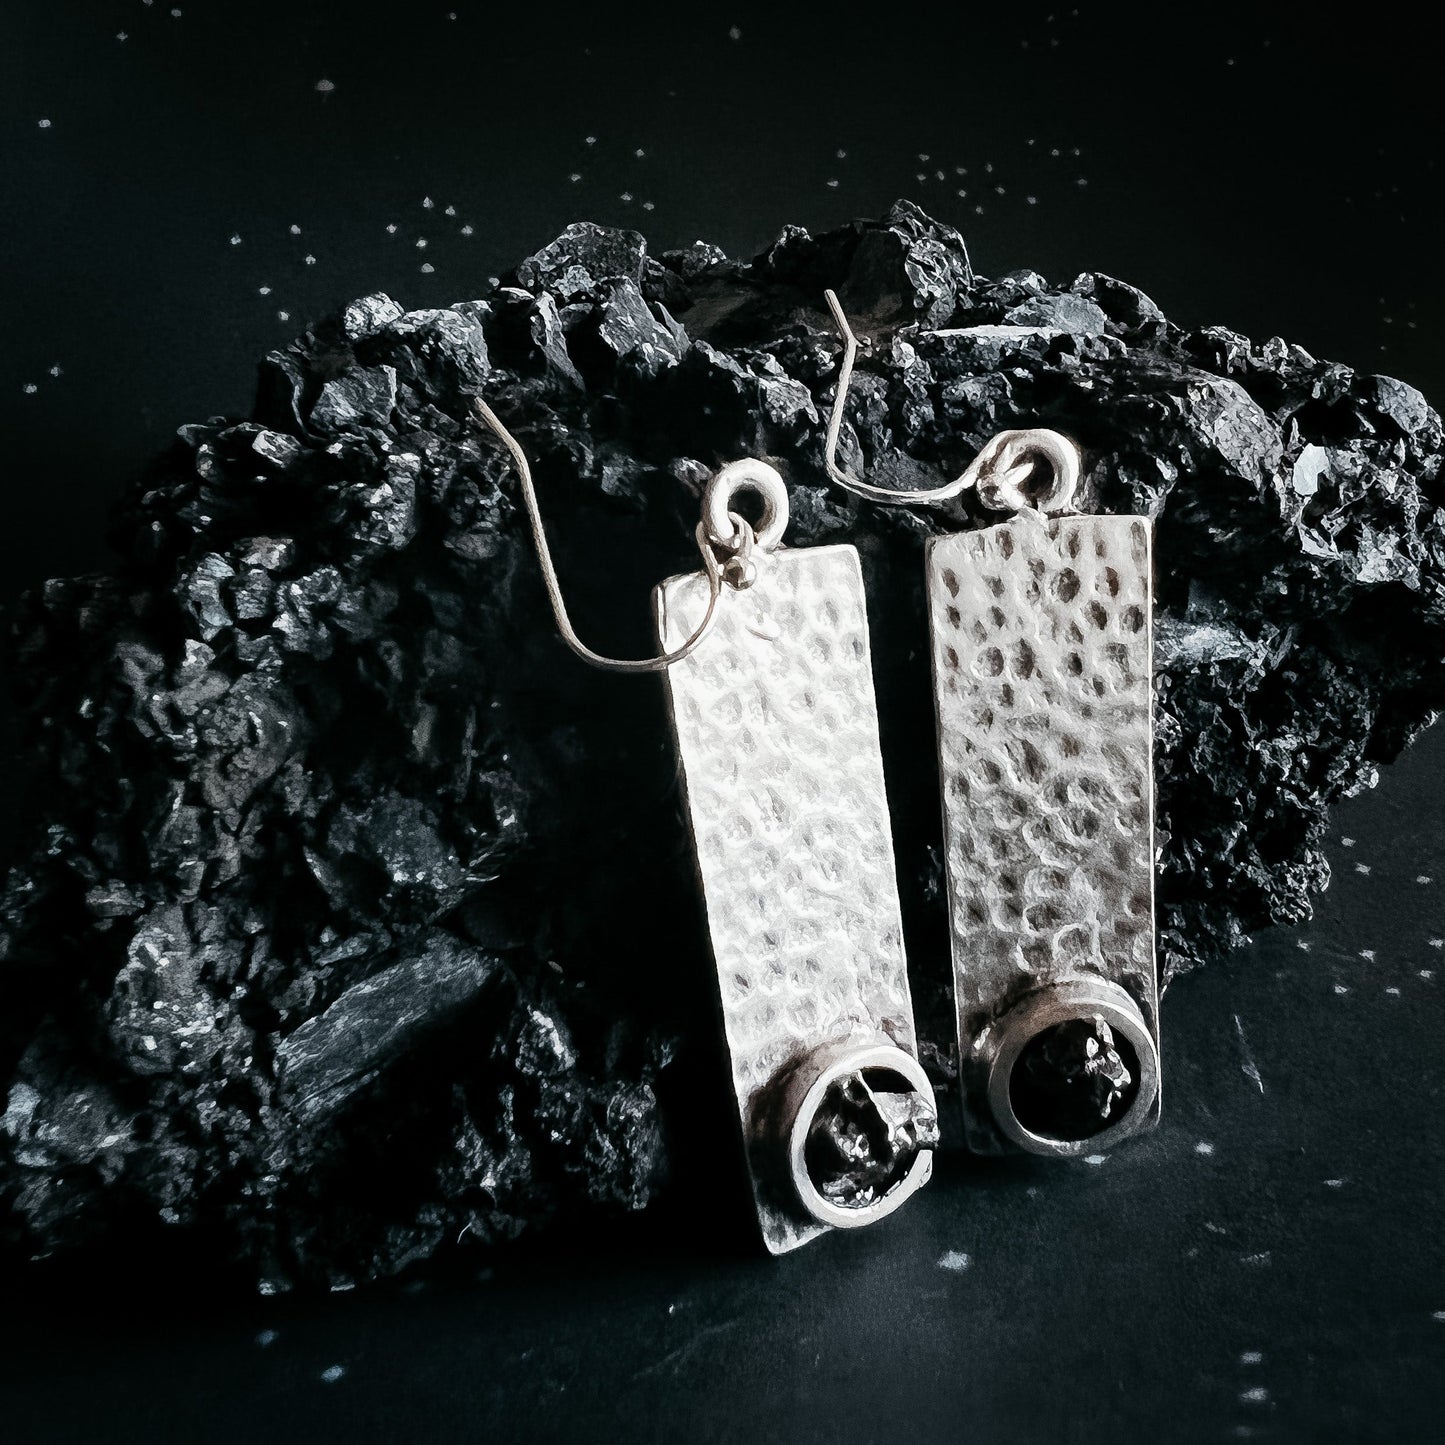 Hammered Silver Rectangle Earrings with Raw Meteorite